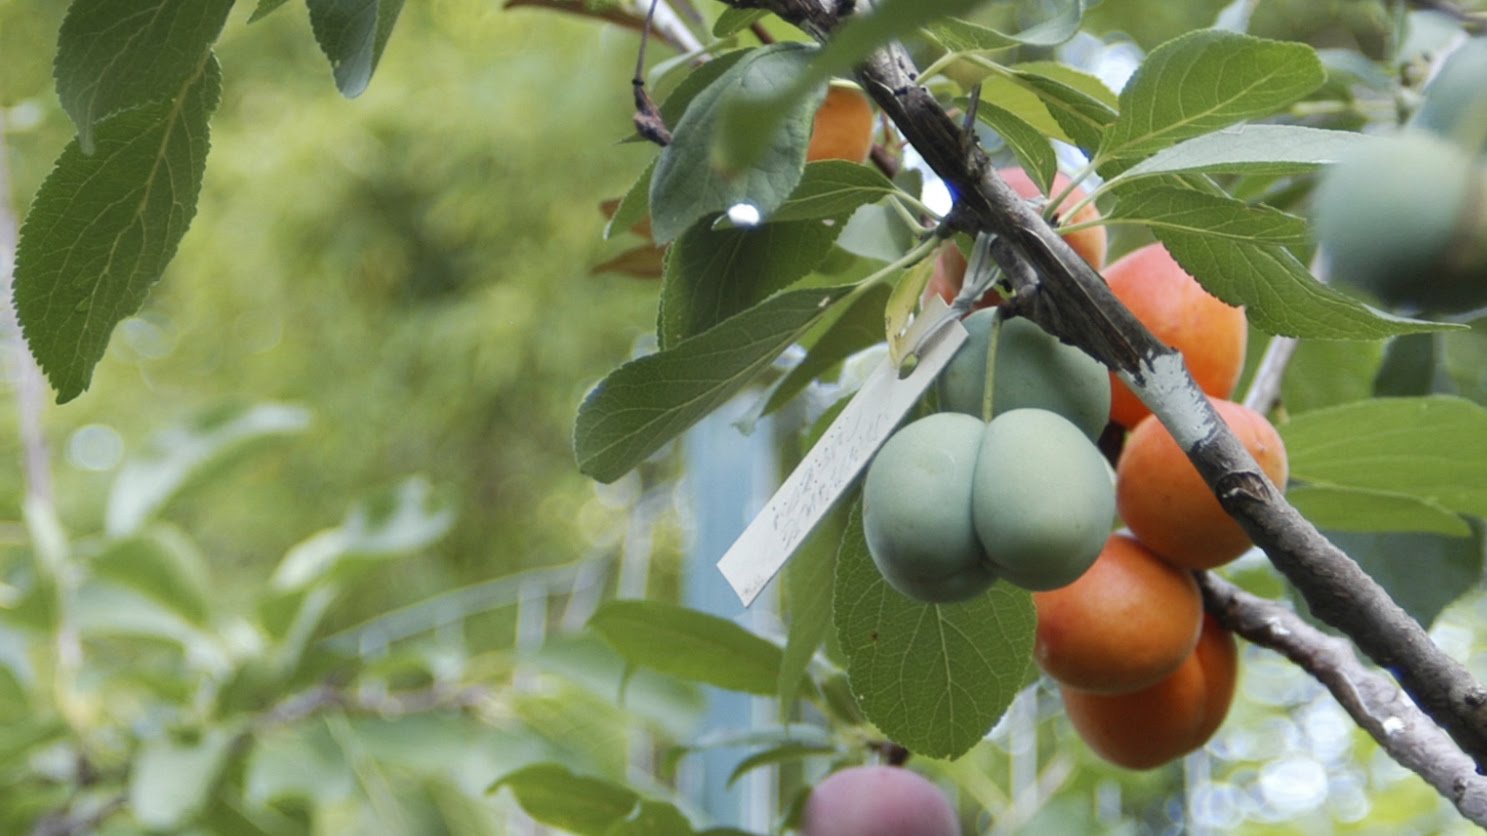 This tree grows 40 kinds of fruit